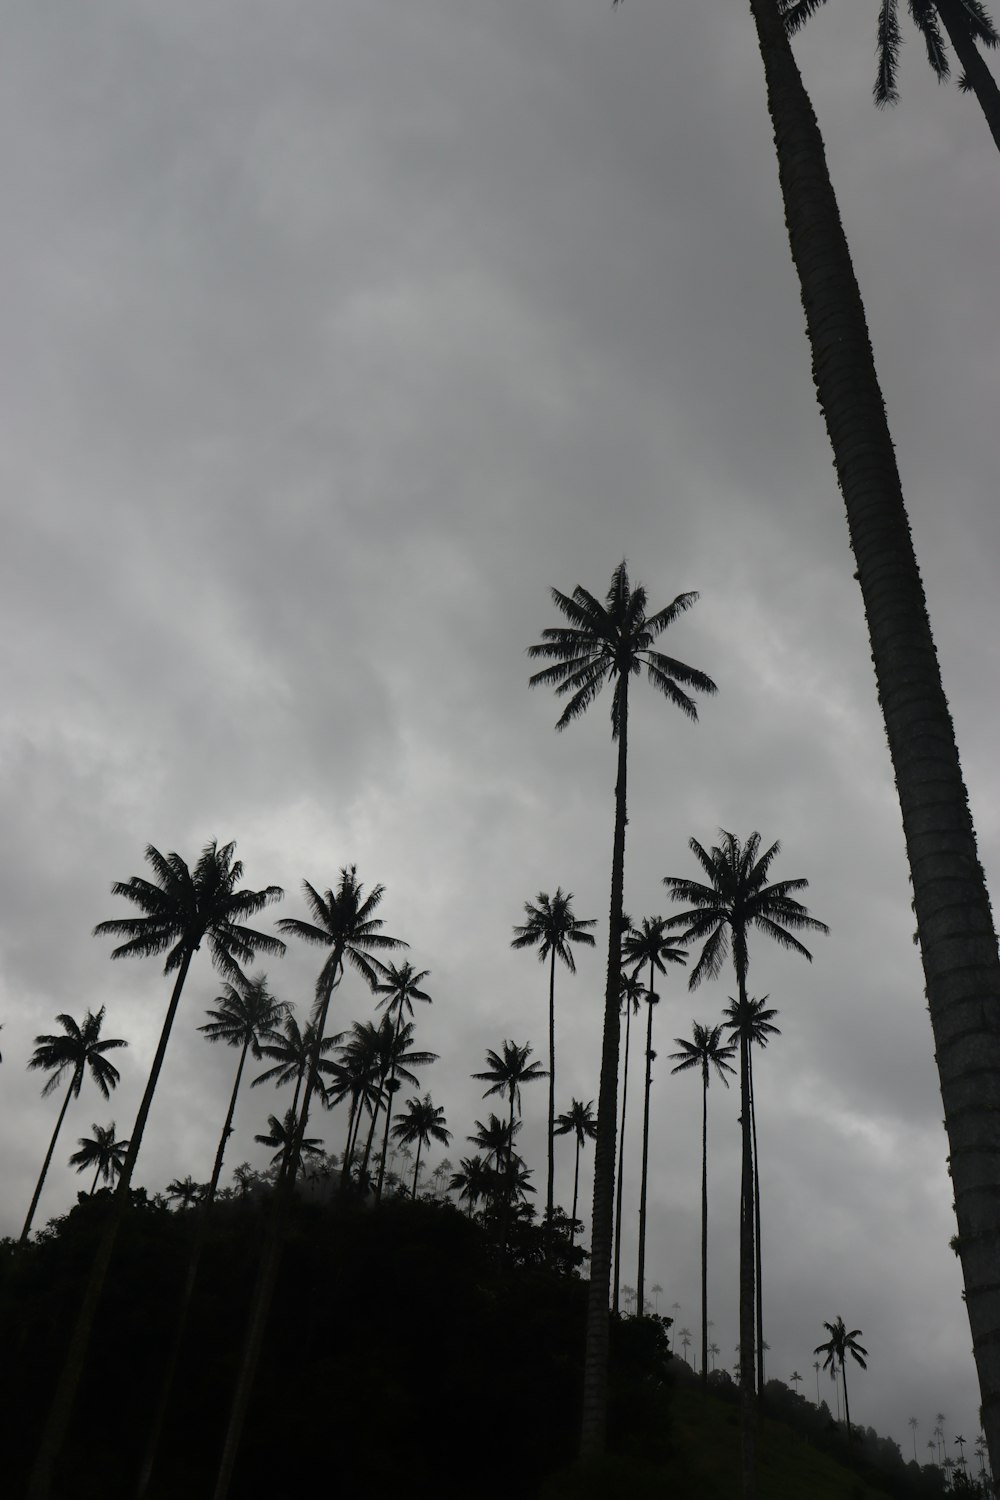 a group of palm trees on a cloudy day